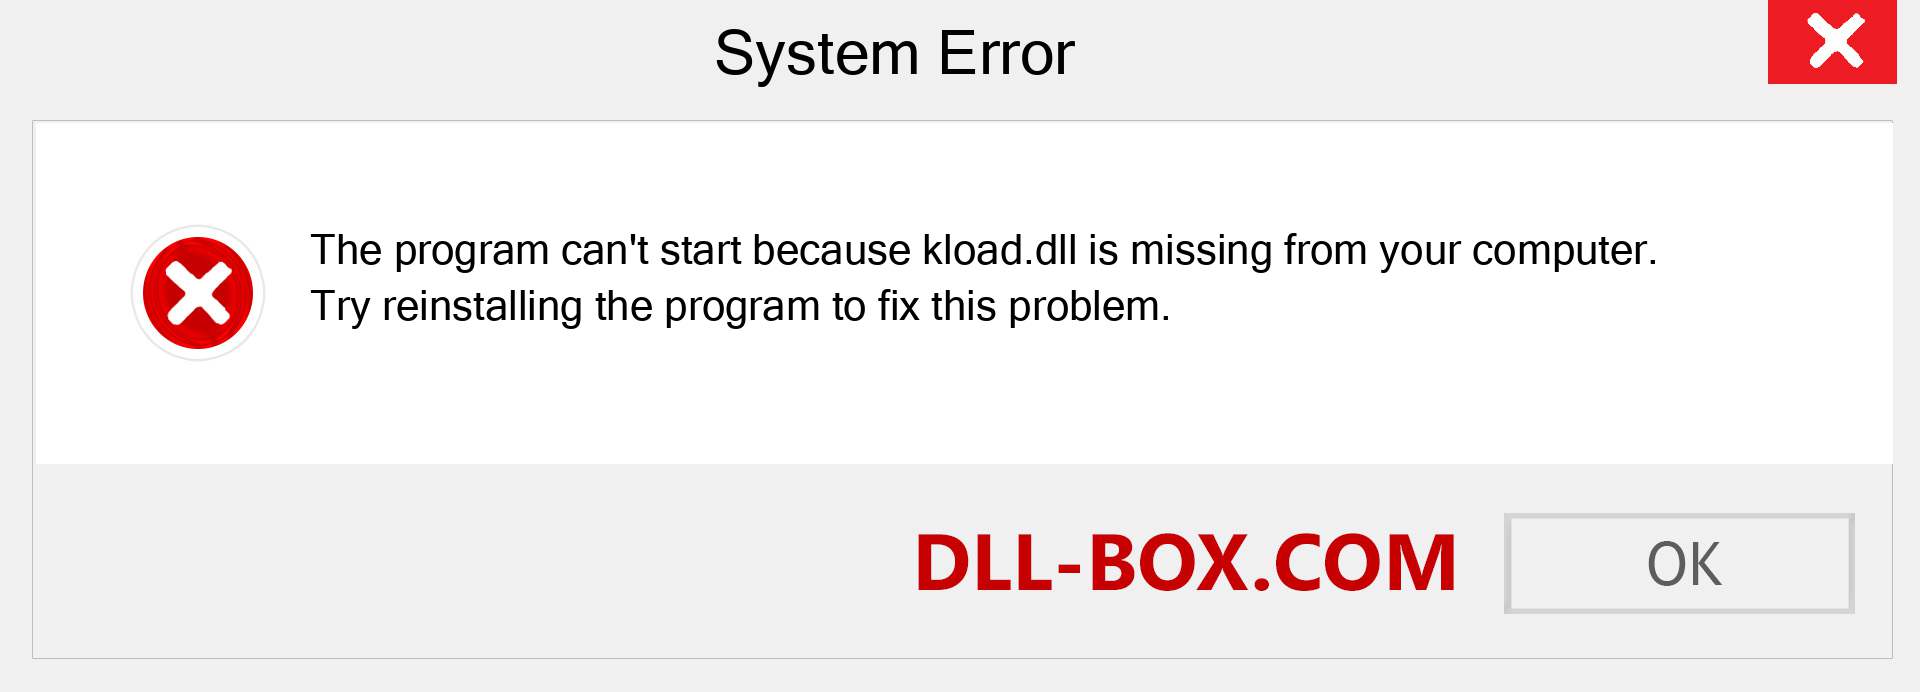  kload.dll file is missing?. Download for Windows 7, 8, 10 - Fix  kload dll Missing Error on Windows, photos, images